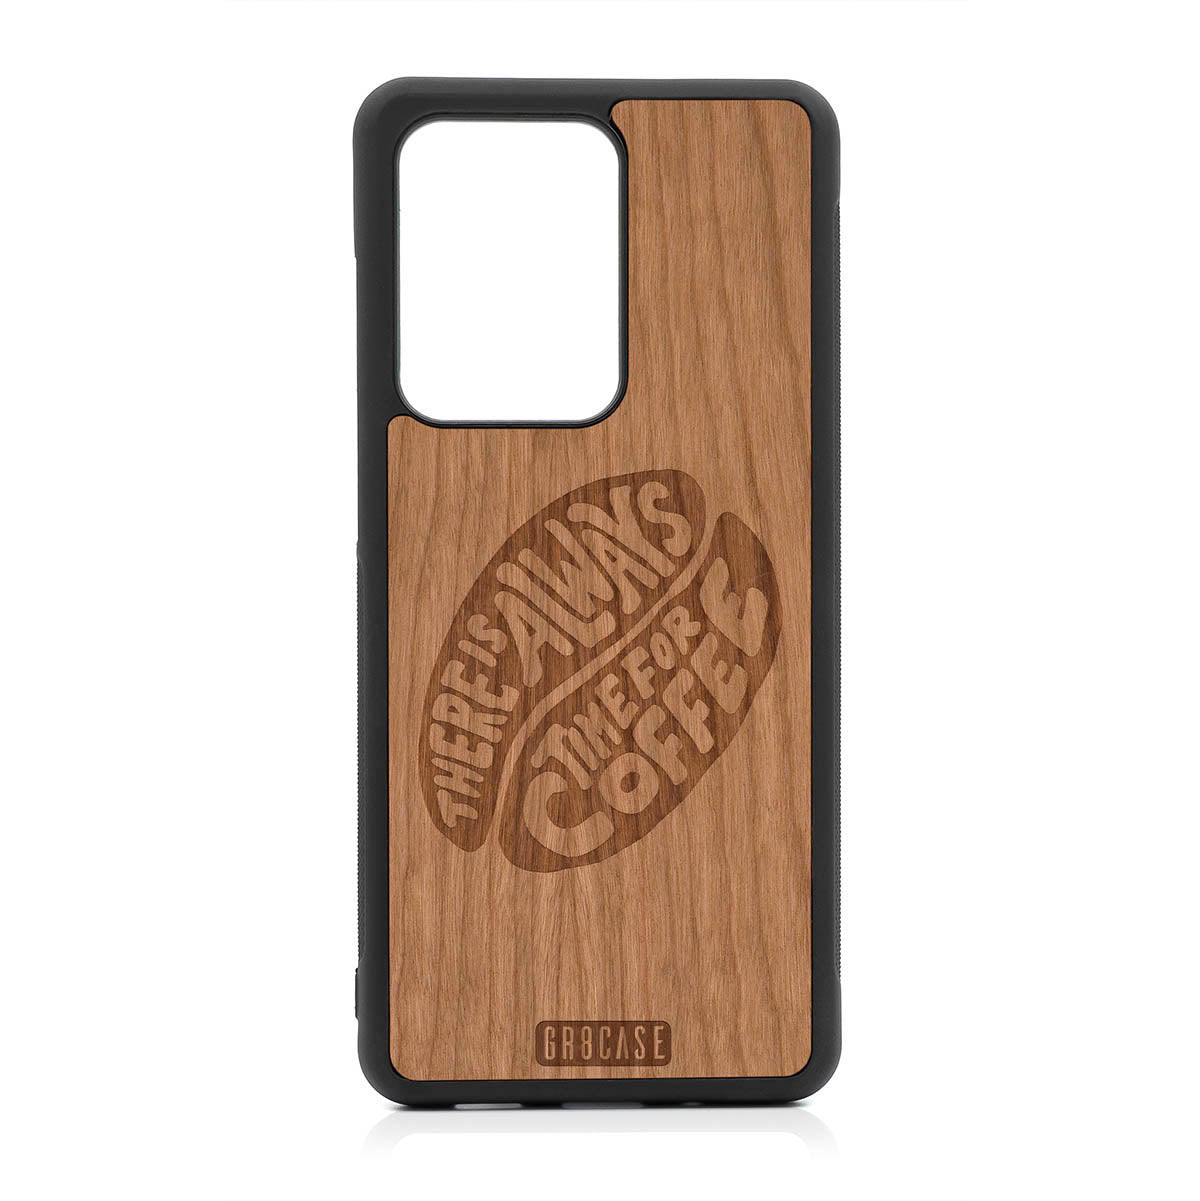 There Is Always Time For Coffee Design Wood Case For Samsung Galaxy S20 Ultra